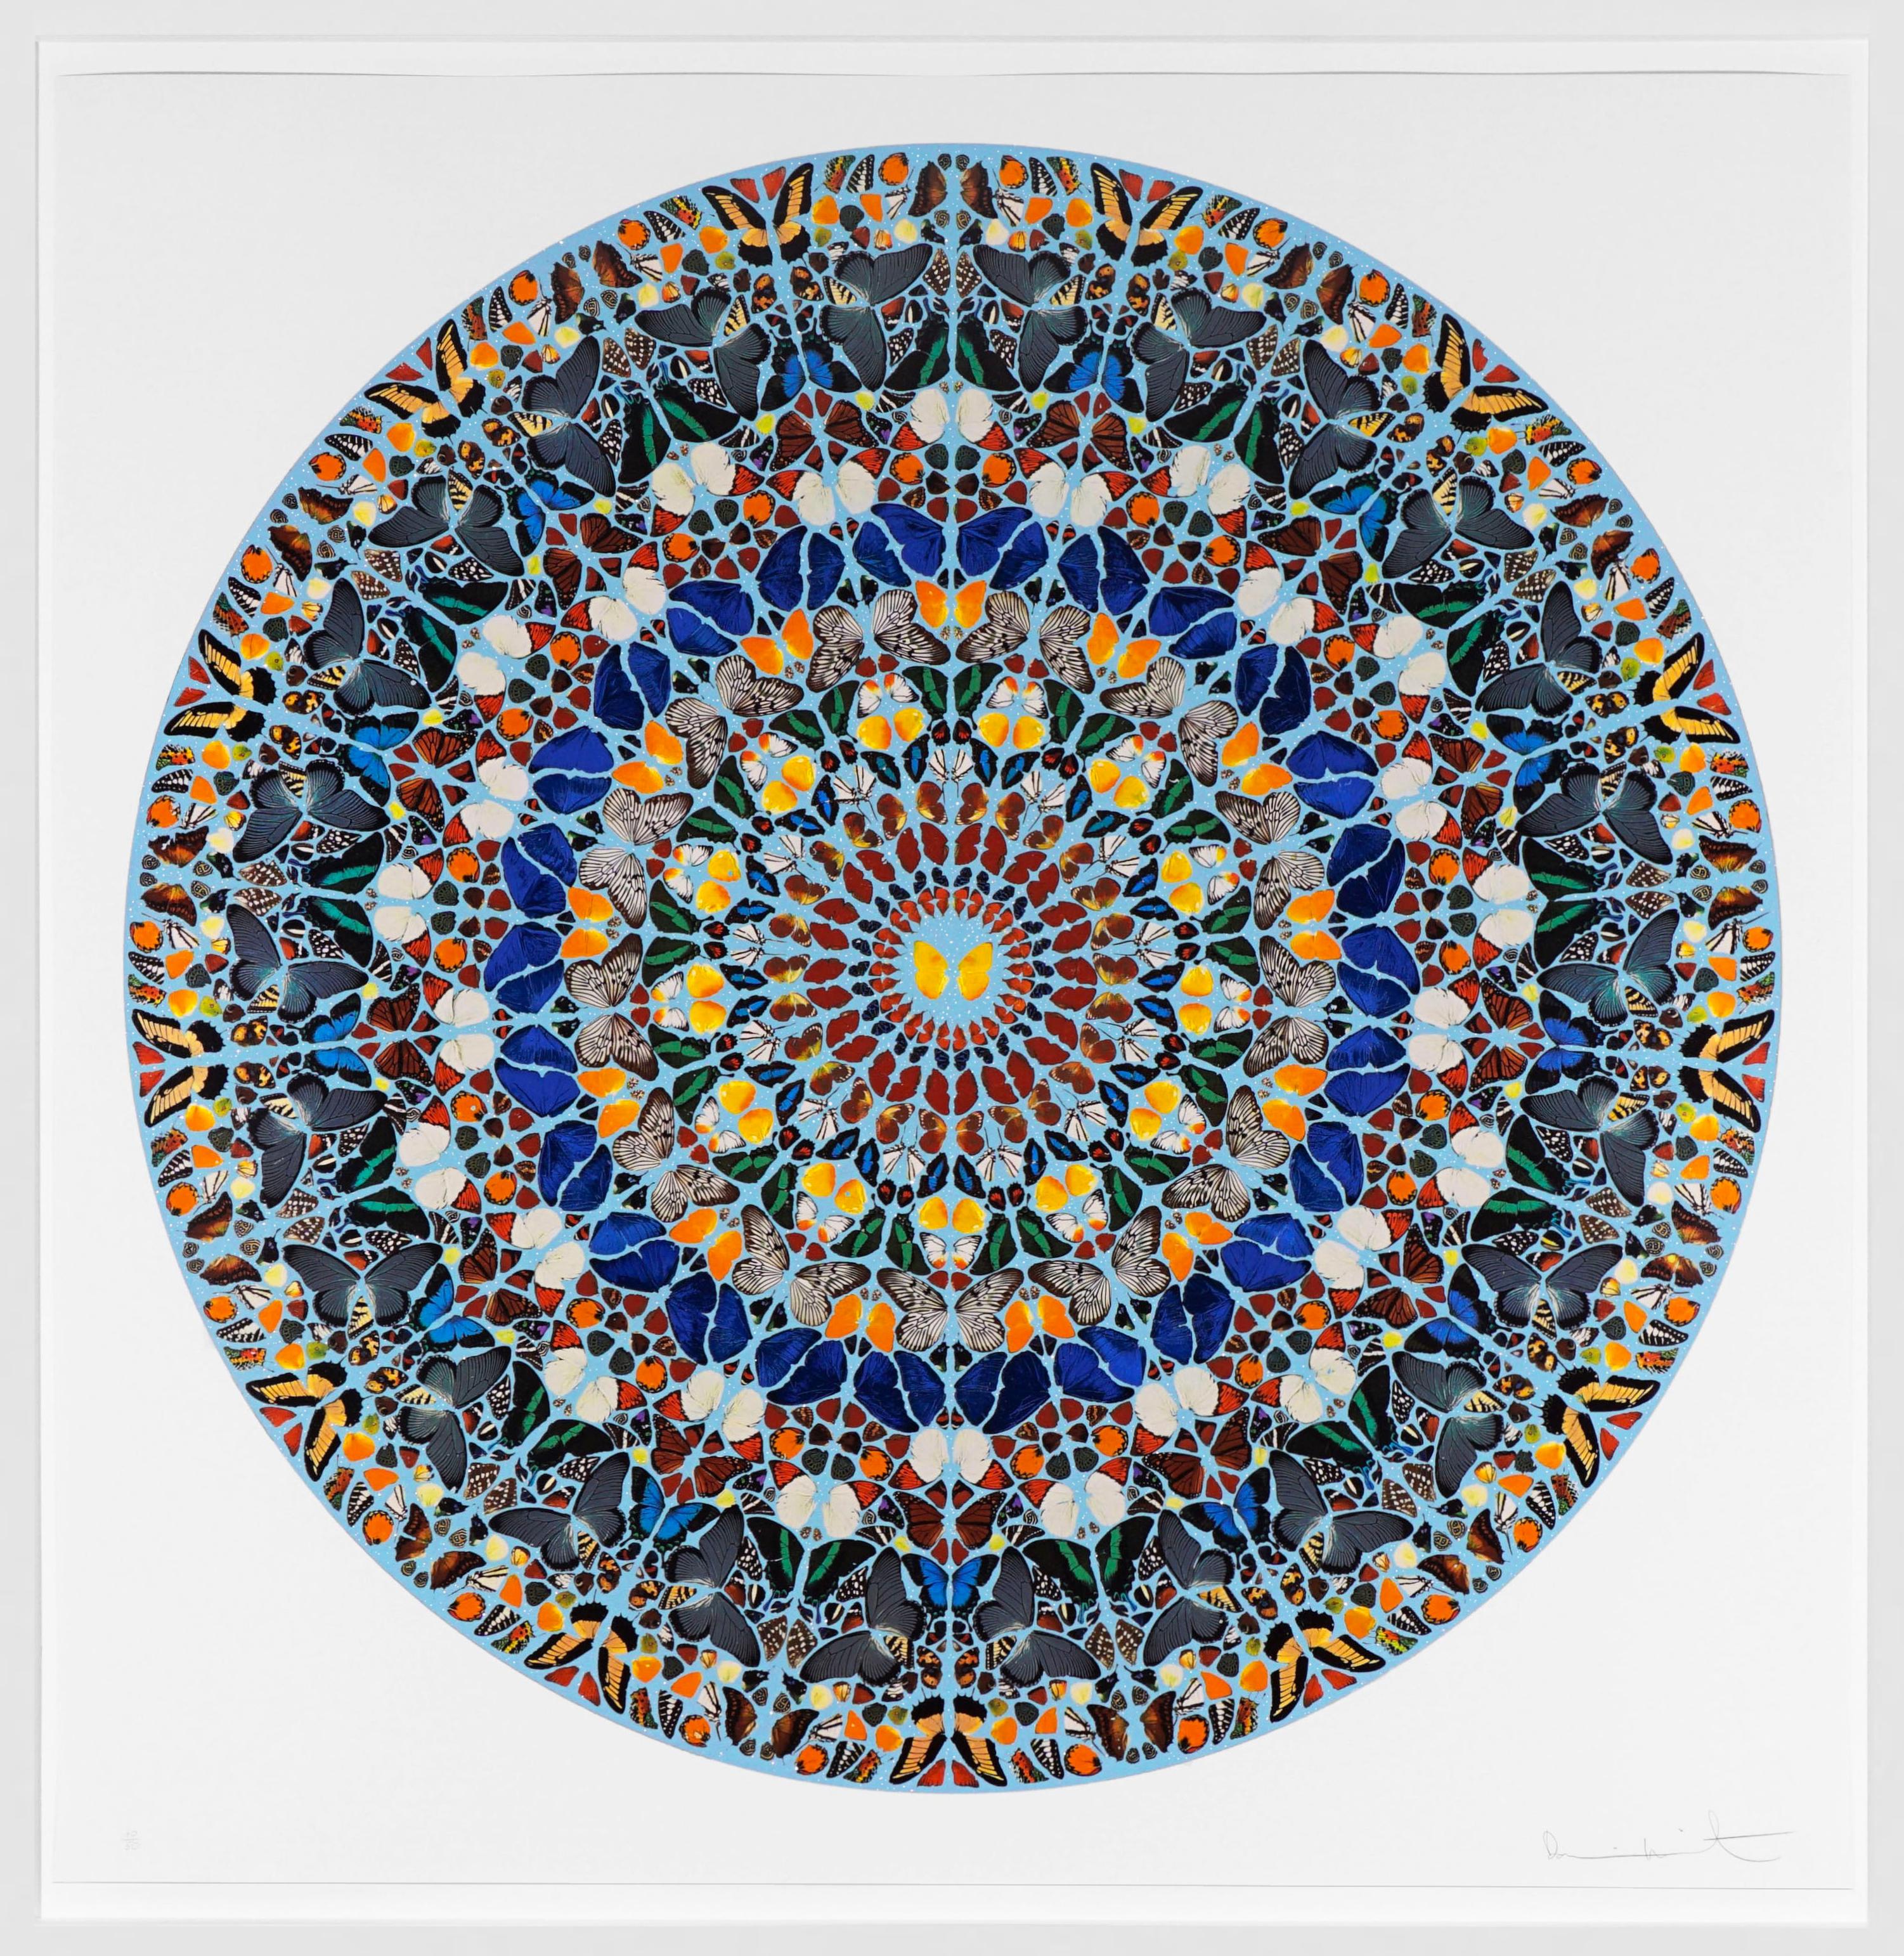 what motif has been used by damien hirst in his work to serve as a universal trigger